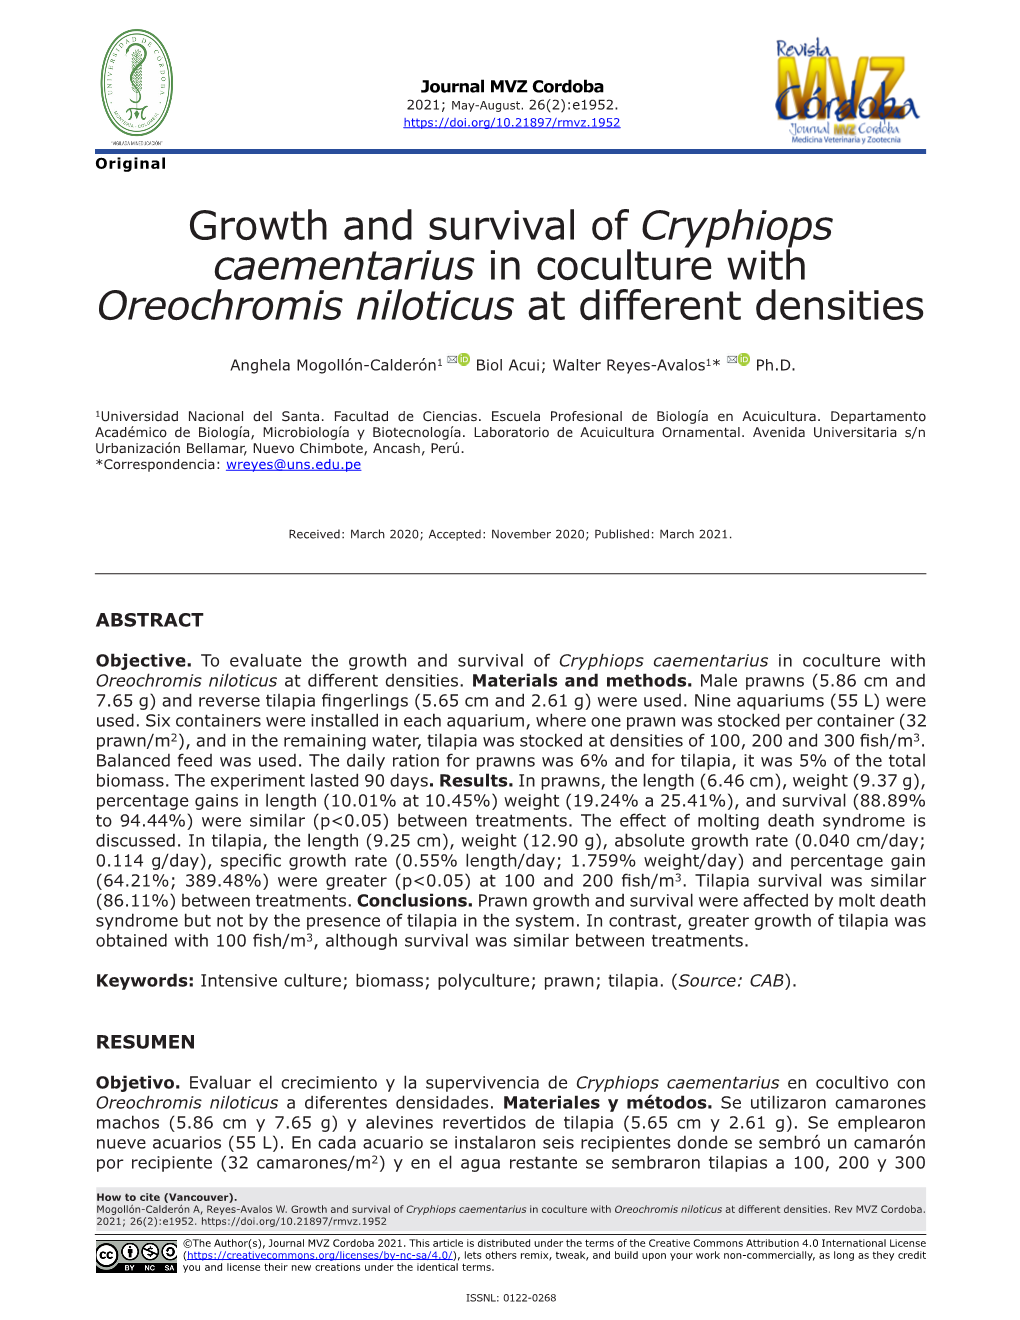 Growth and Survival of Cryphiops Caementarius in Coculture with Oreochromis Niloticus at Different Densities